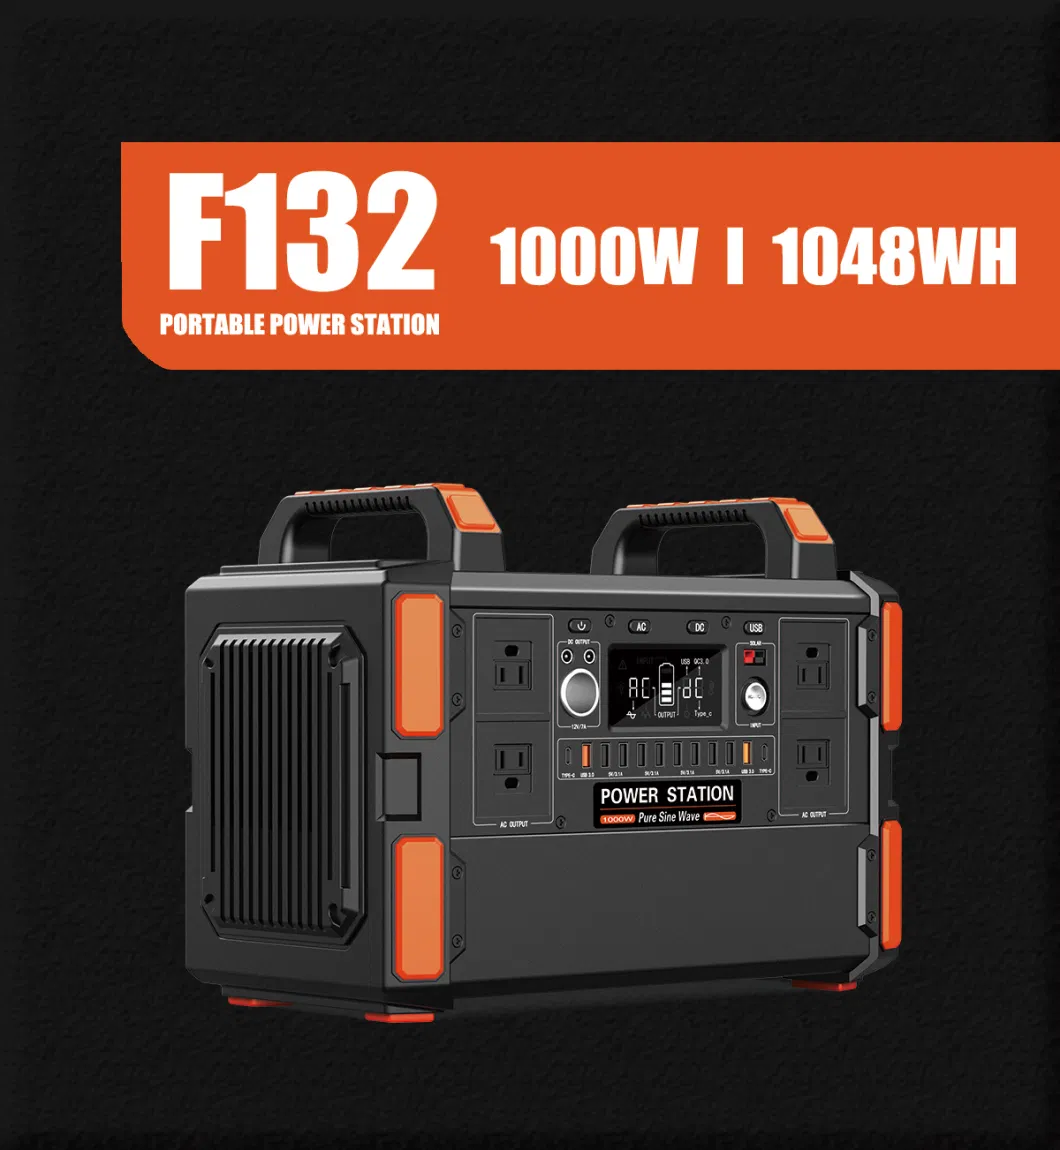 Solar Generator 1000W 1048wh Backup Lithium Battery 110V/1000W Pure Sine Wave AC Outlet Solar Generator for Outdoors Camping Travel Hunting Emergency